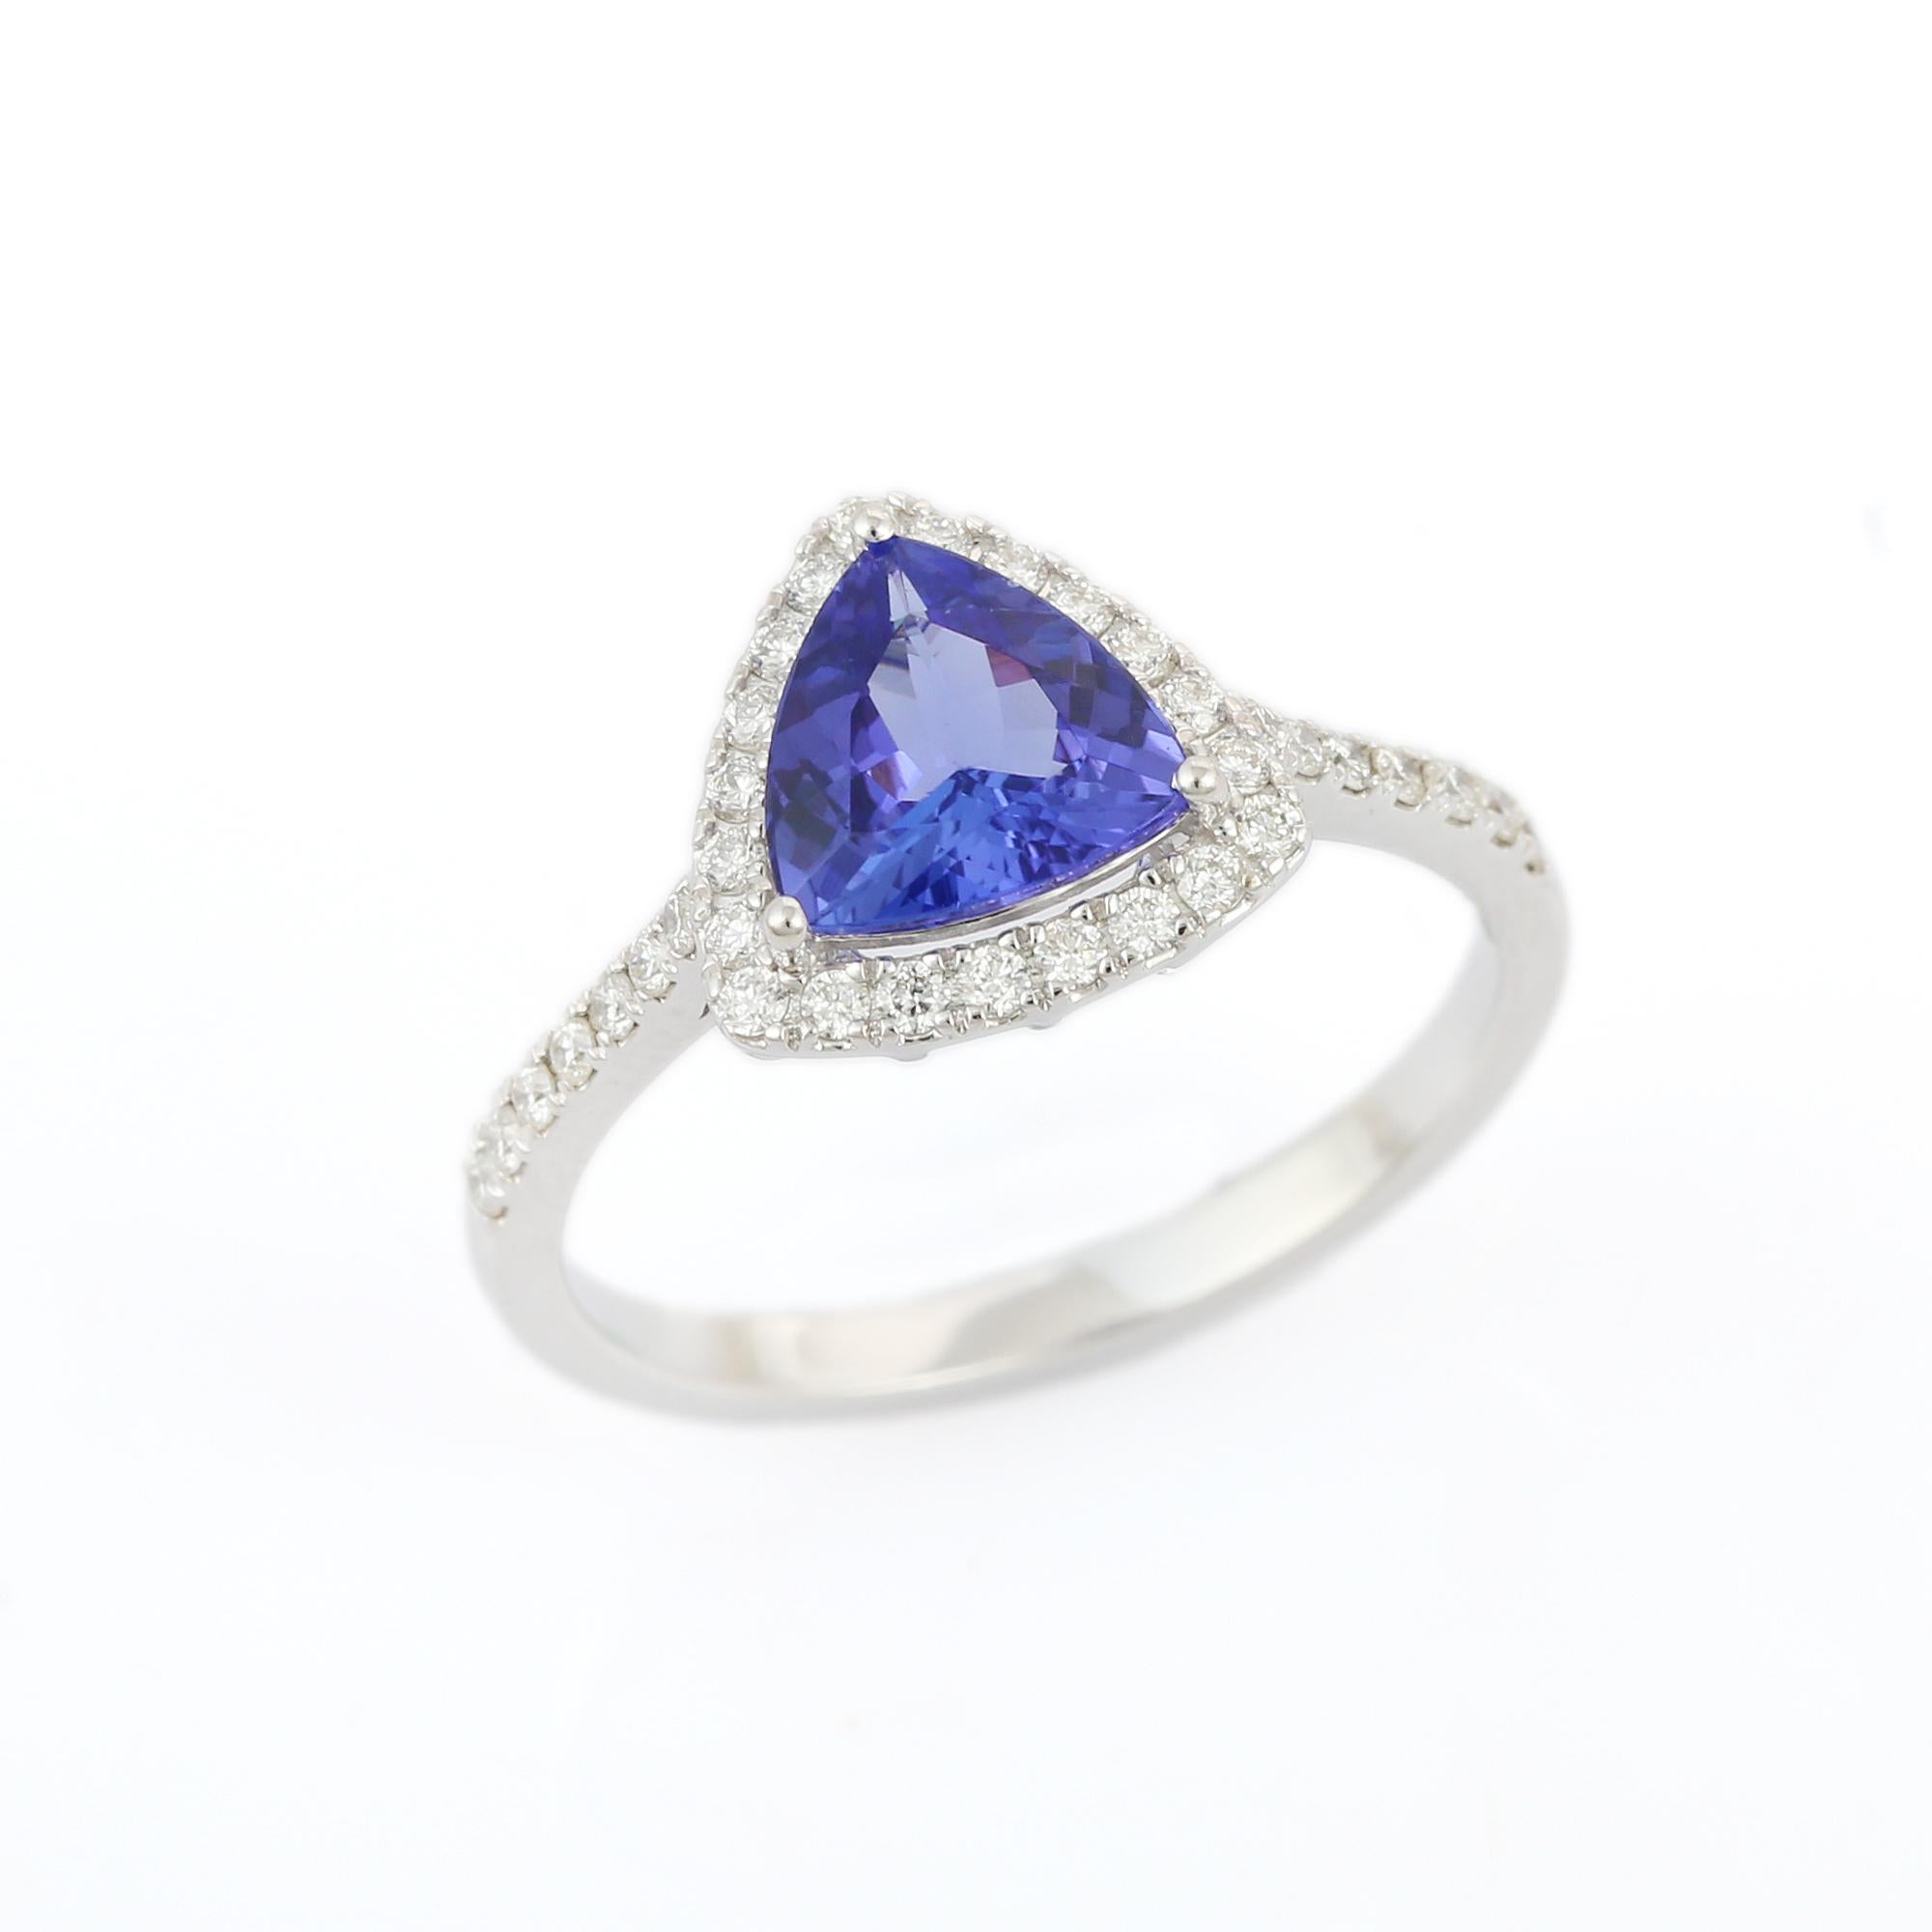 For Sale:  Natural Tanzanite Diamond Engagement Ring in 18k Solid White Gold 4